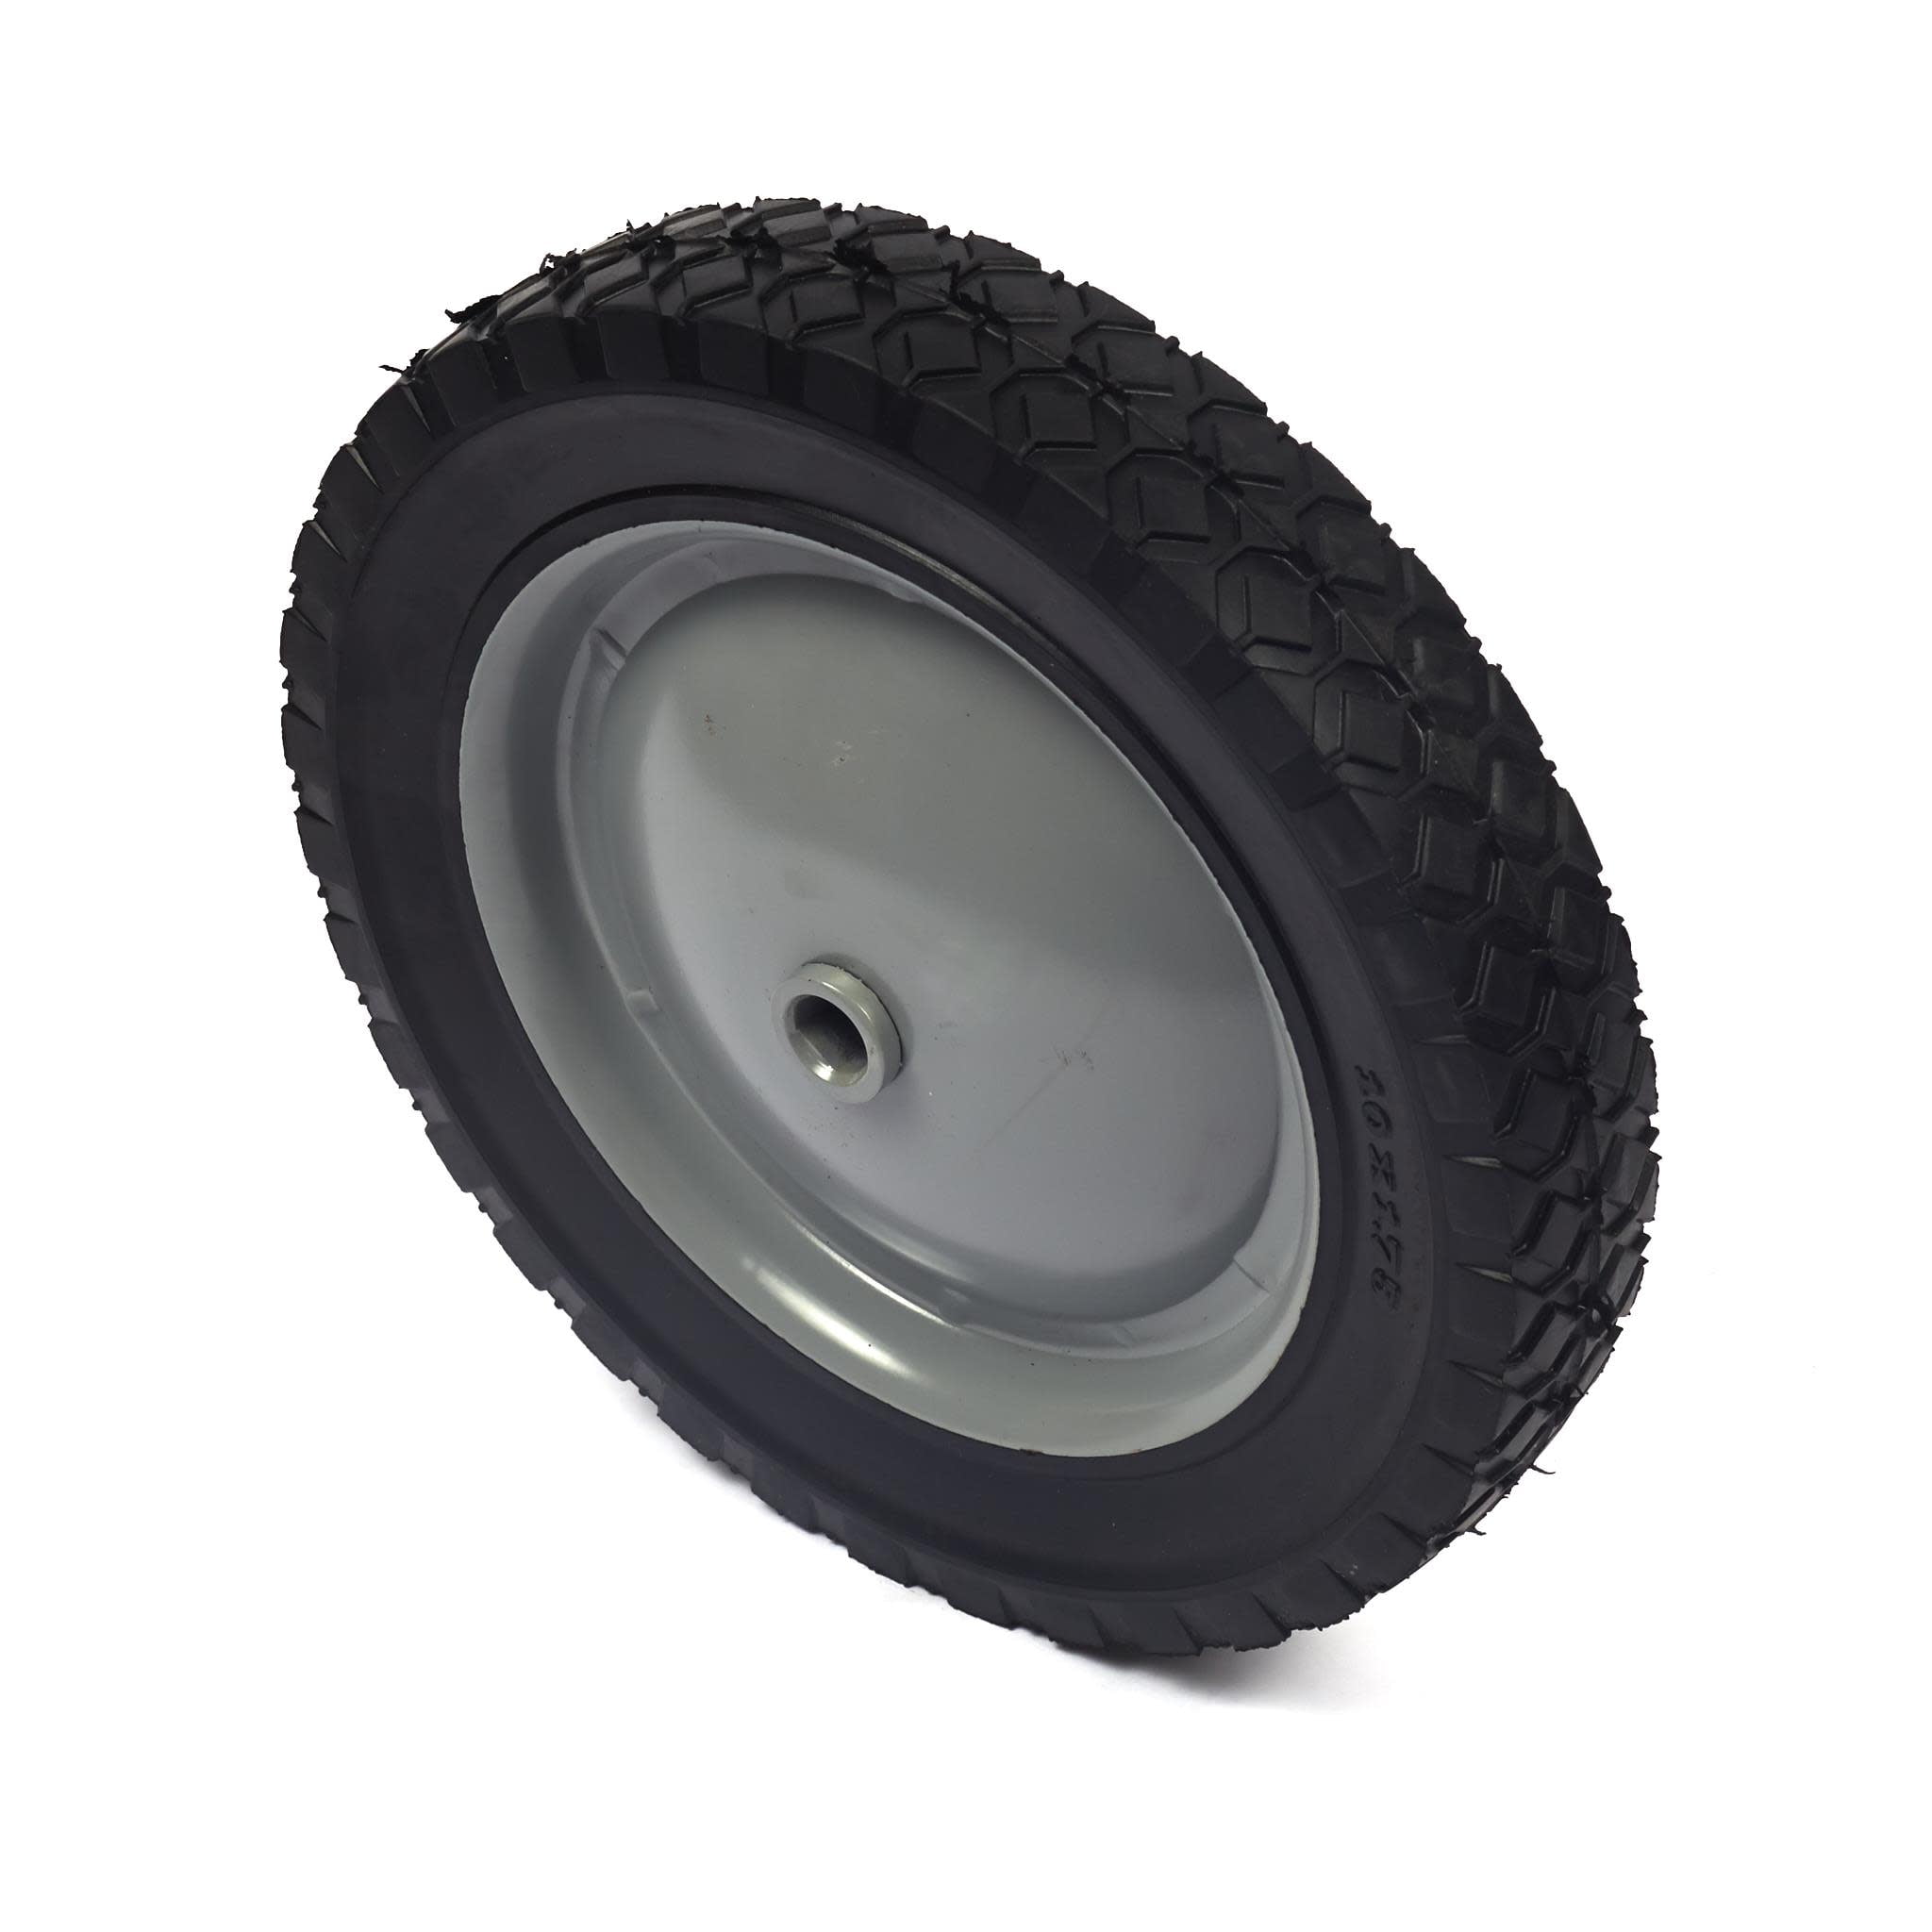 Briggs and Stratton Self-Propelled Wheel (Gray 10 x 1.75)